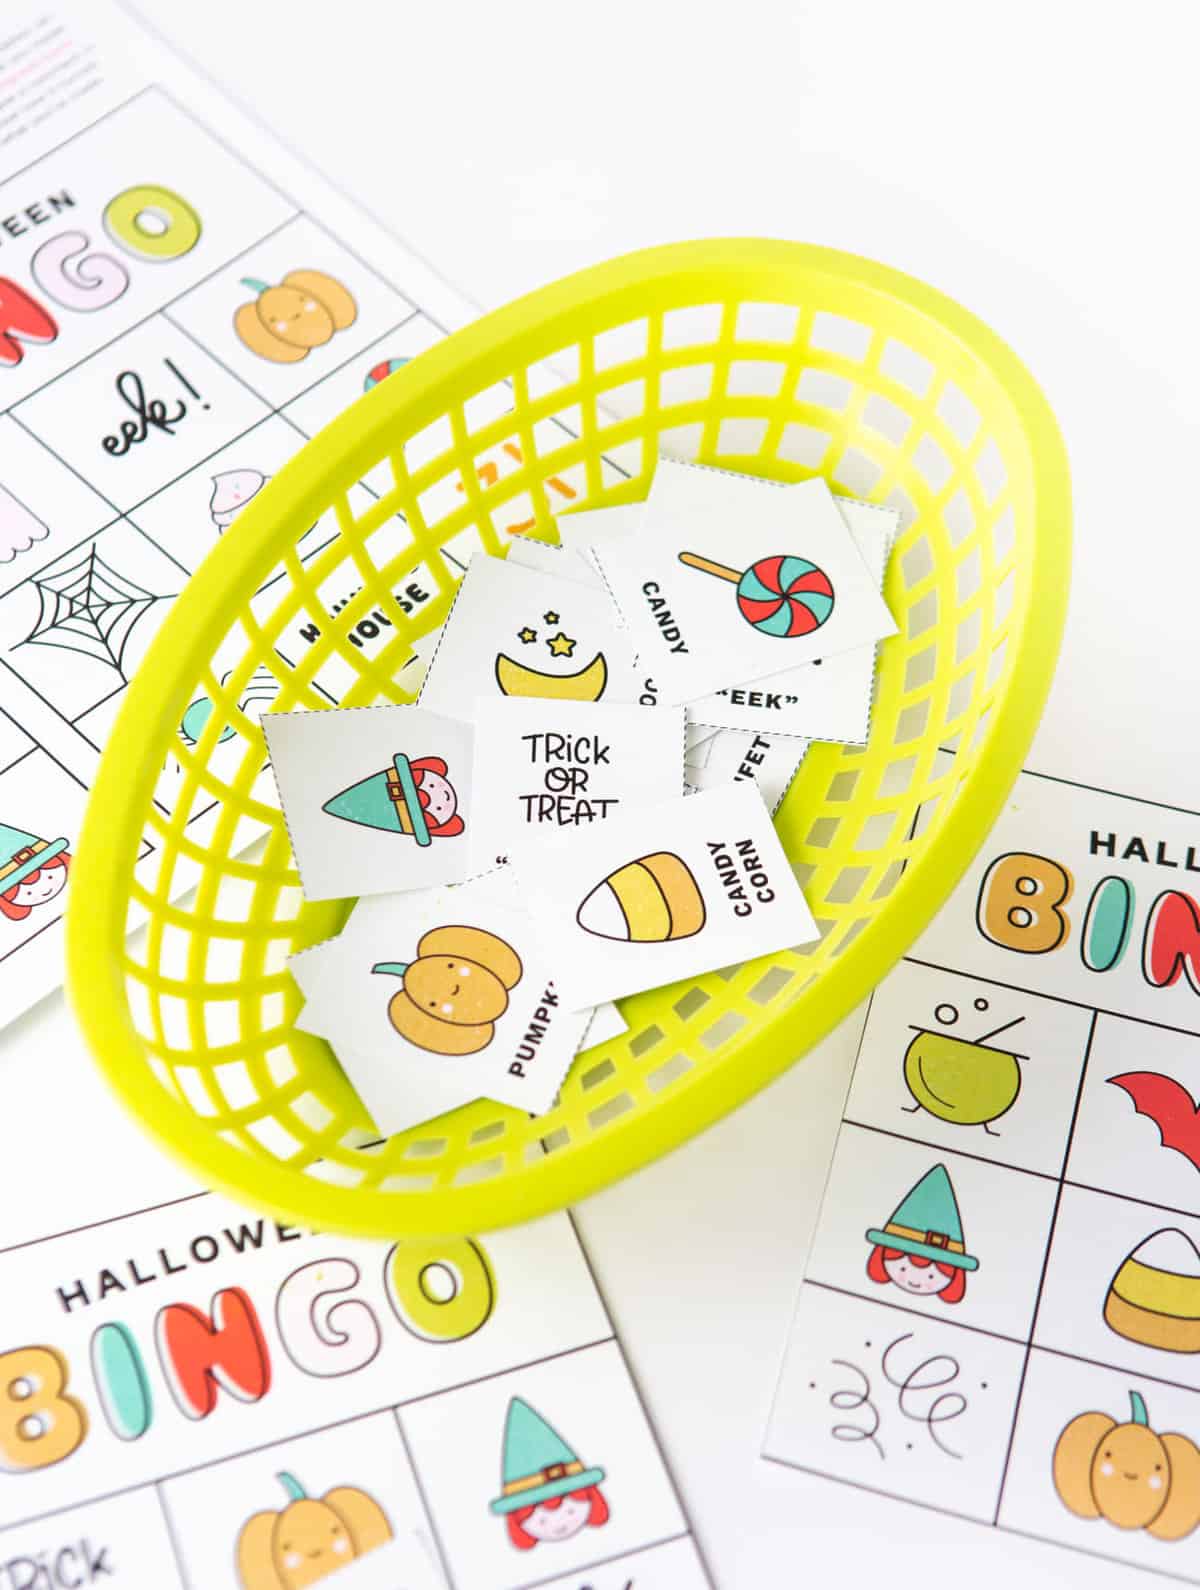 Basket of Halloween bingo cards calling cards with icons and pictures: pumpkin, witch, lollipop, cauldron, spider, ghost